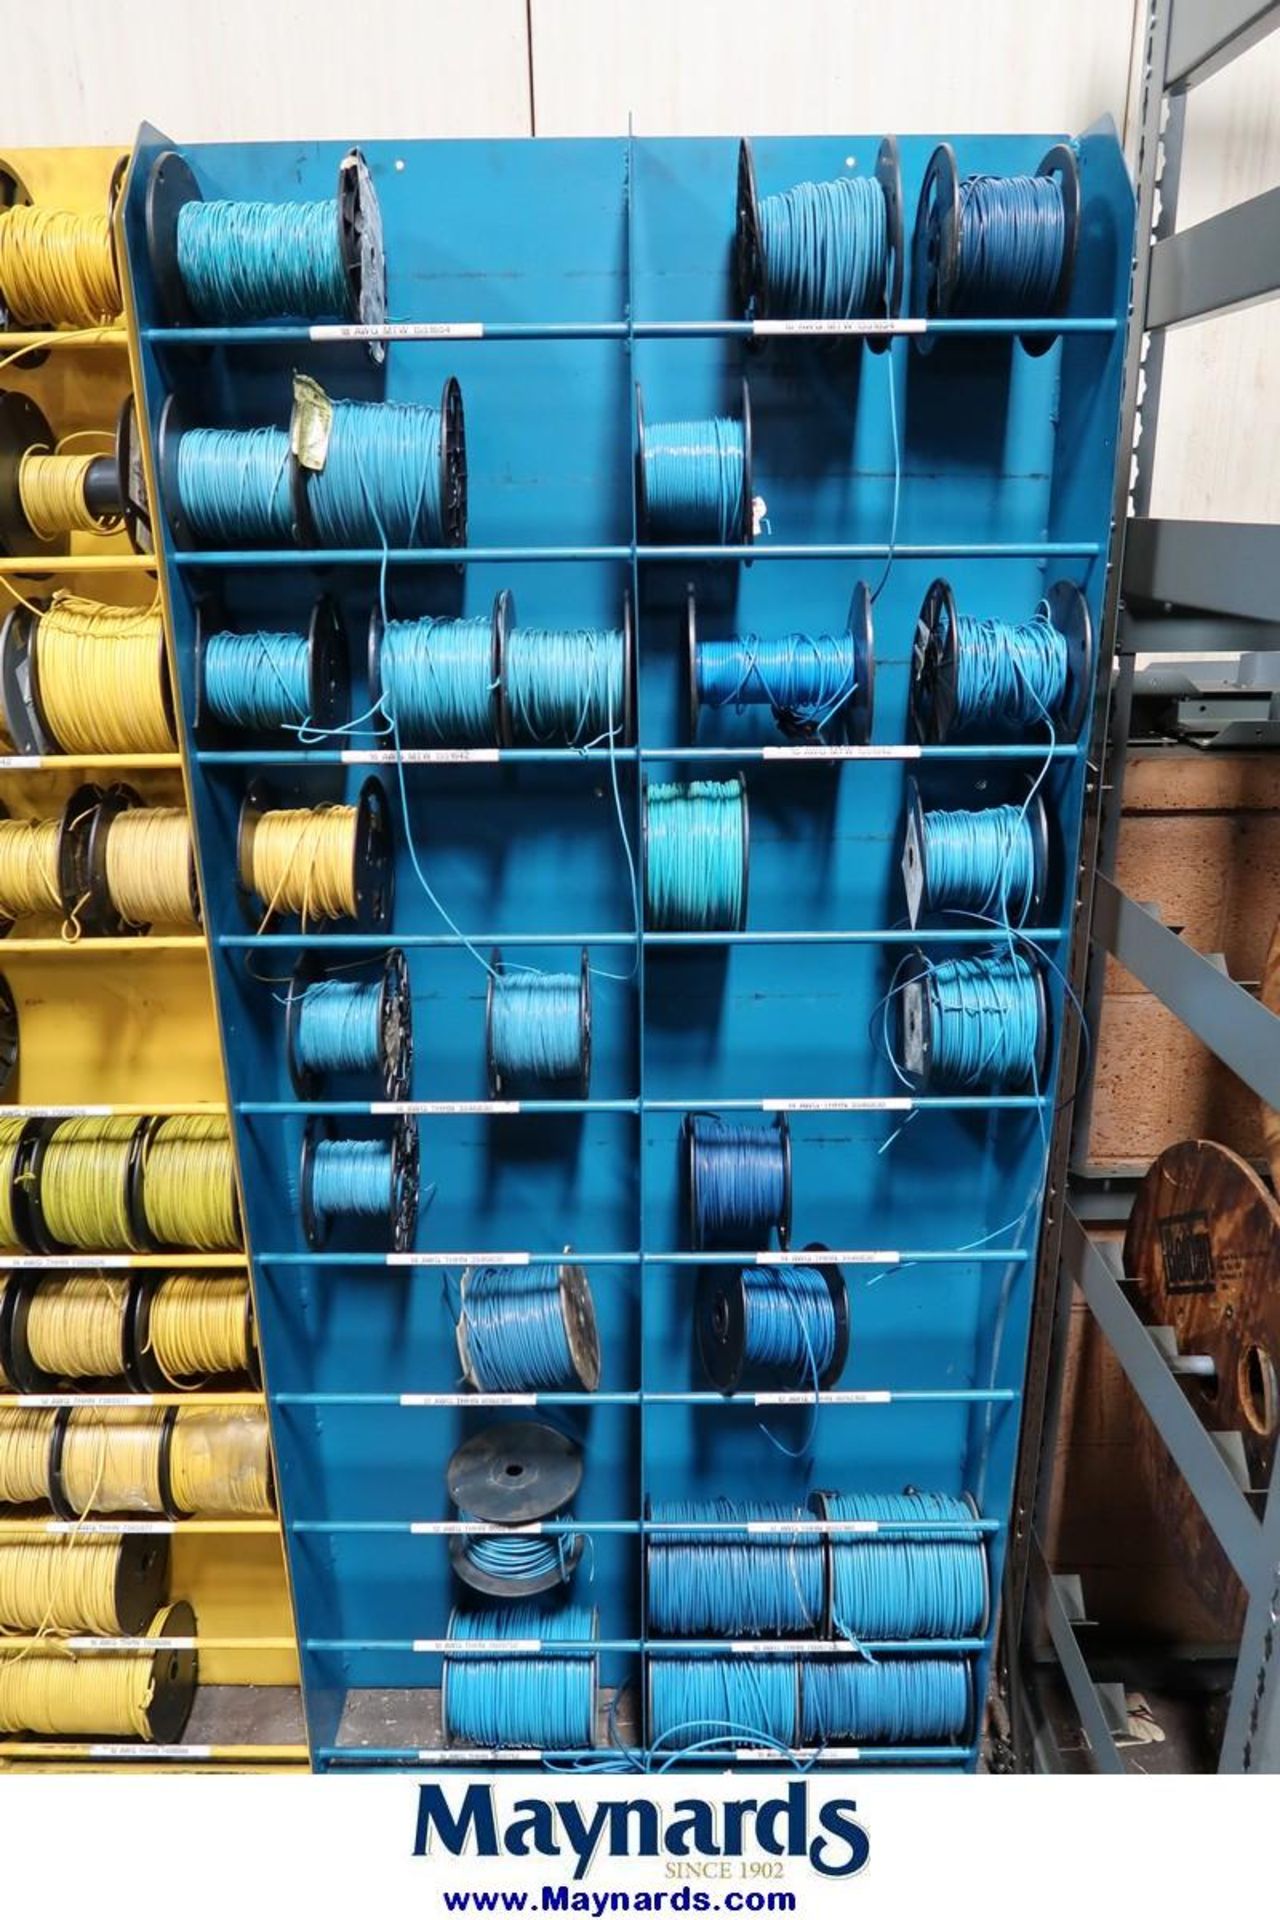 Wire Racks with Contents of Wire Spools - Image 6 of 6